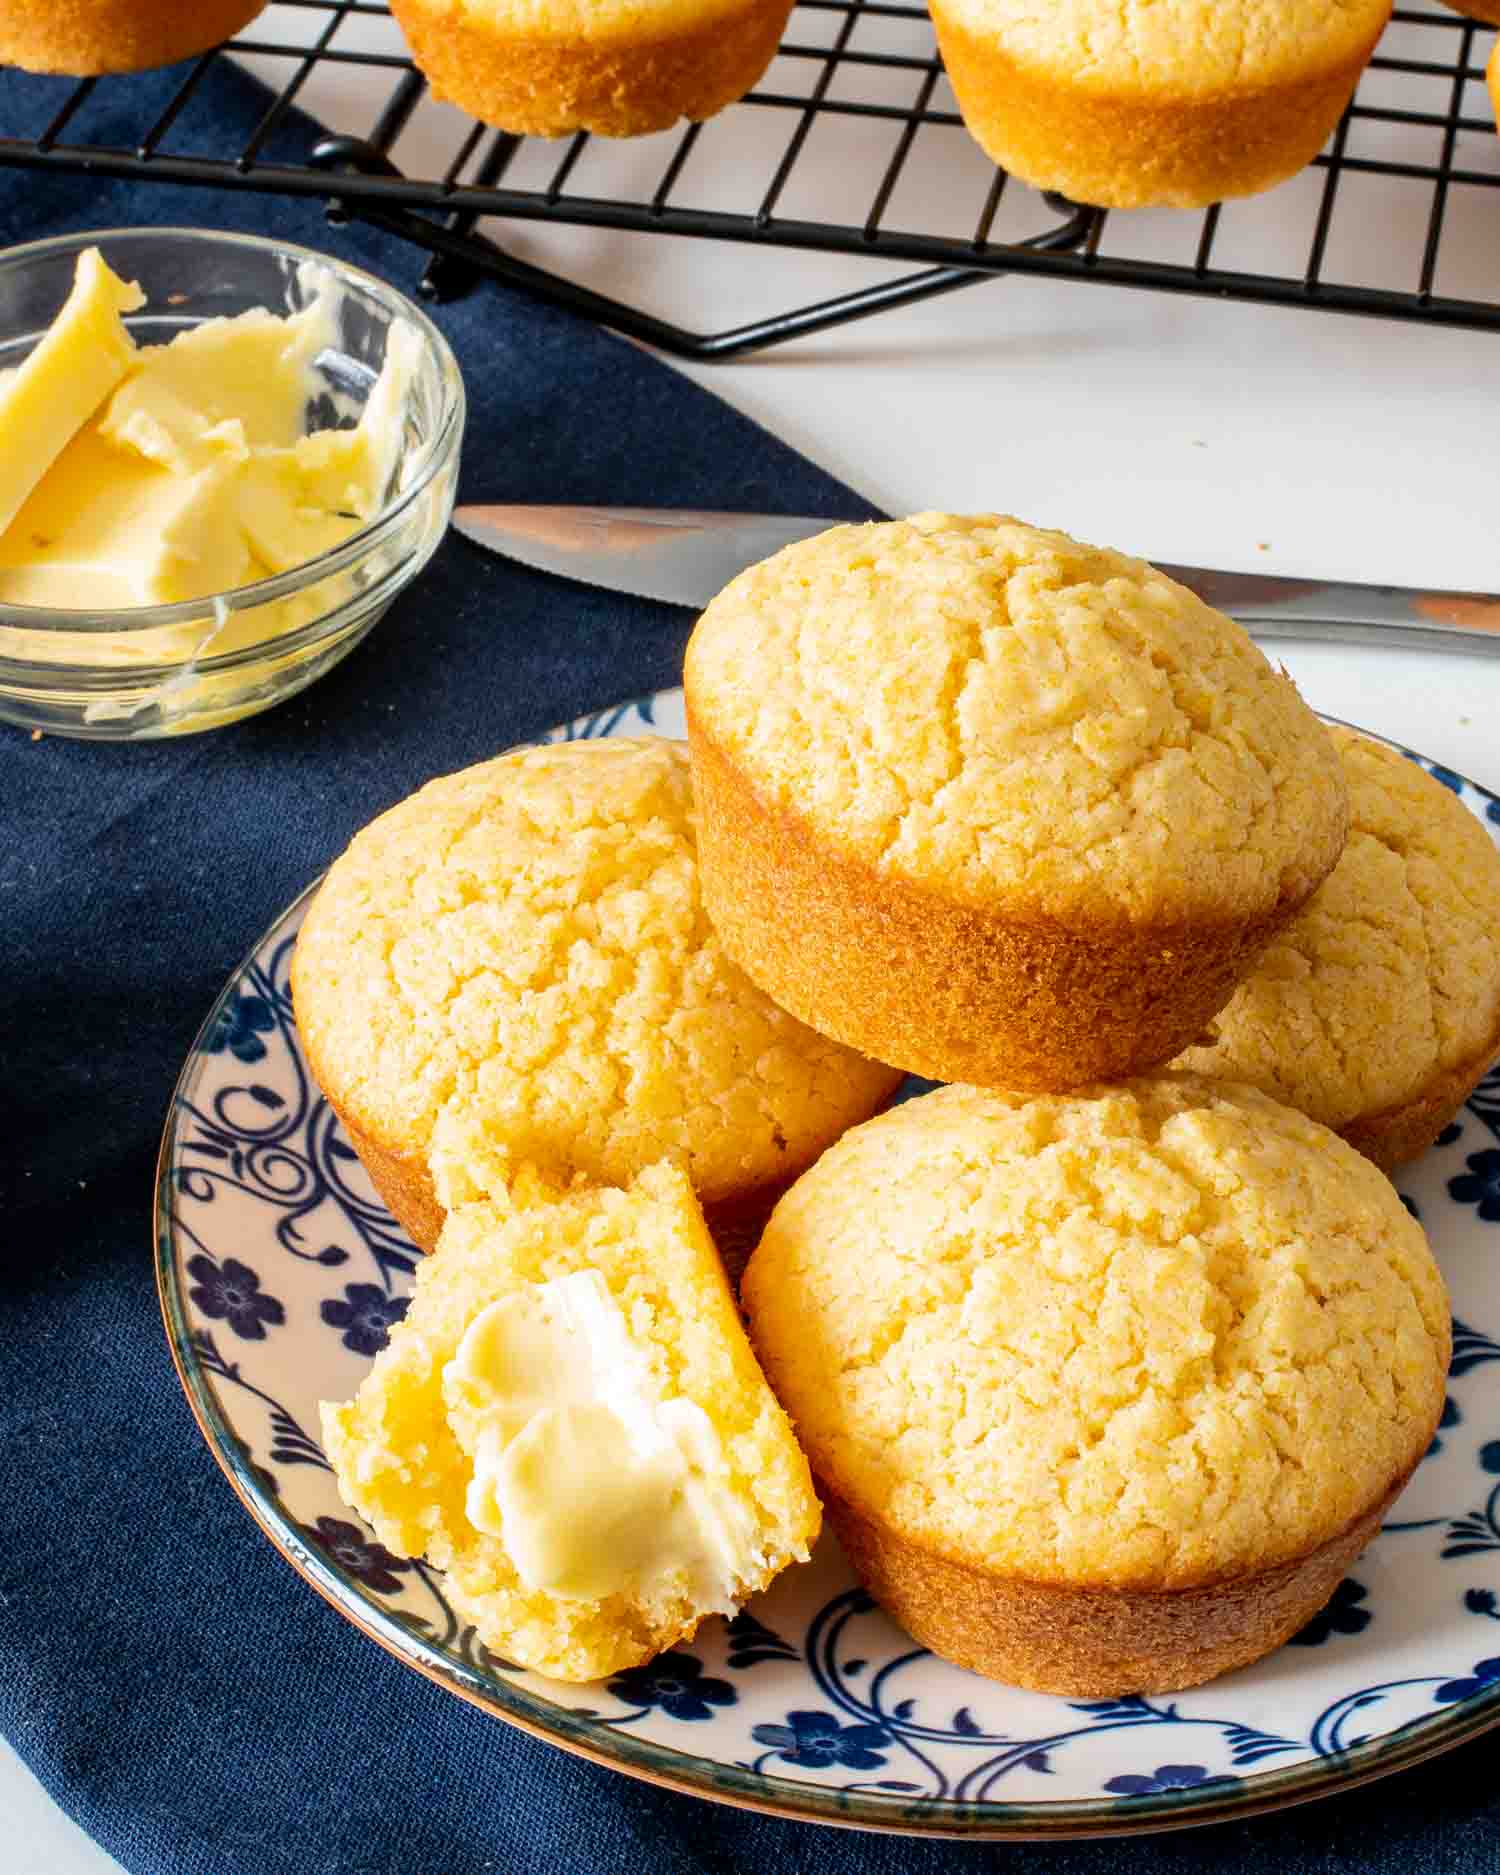 a cornbread muffin broken in half with butter on a plate with a few other cornbread muffins.